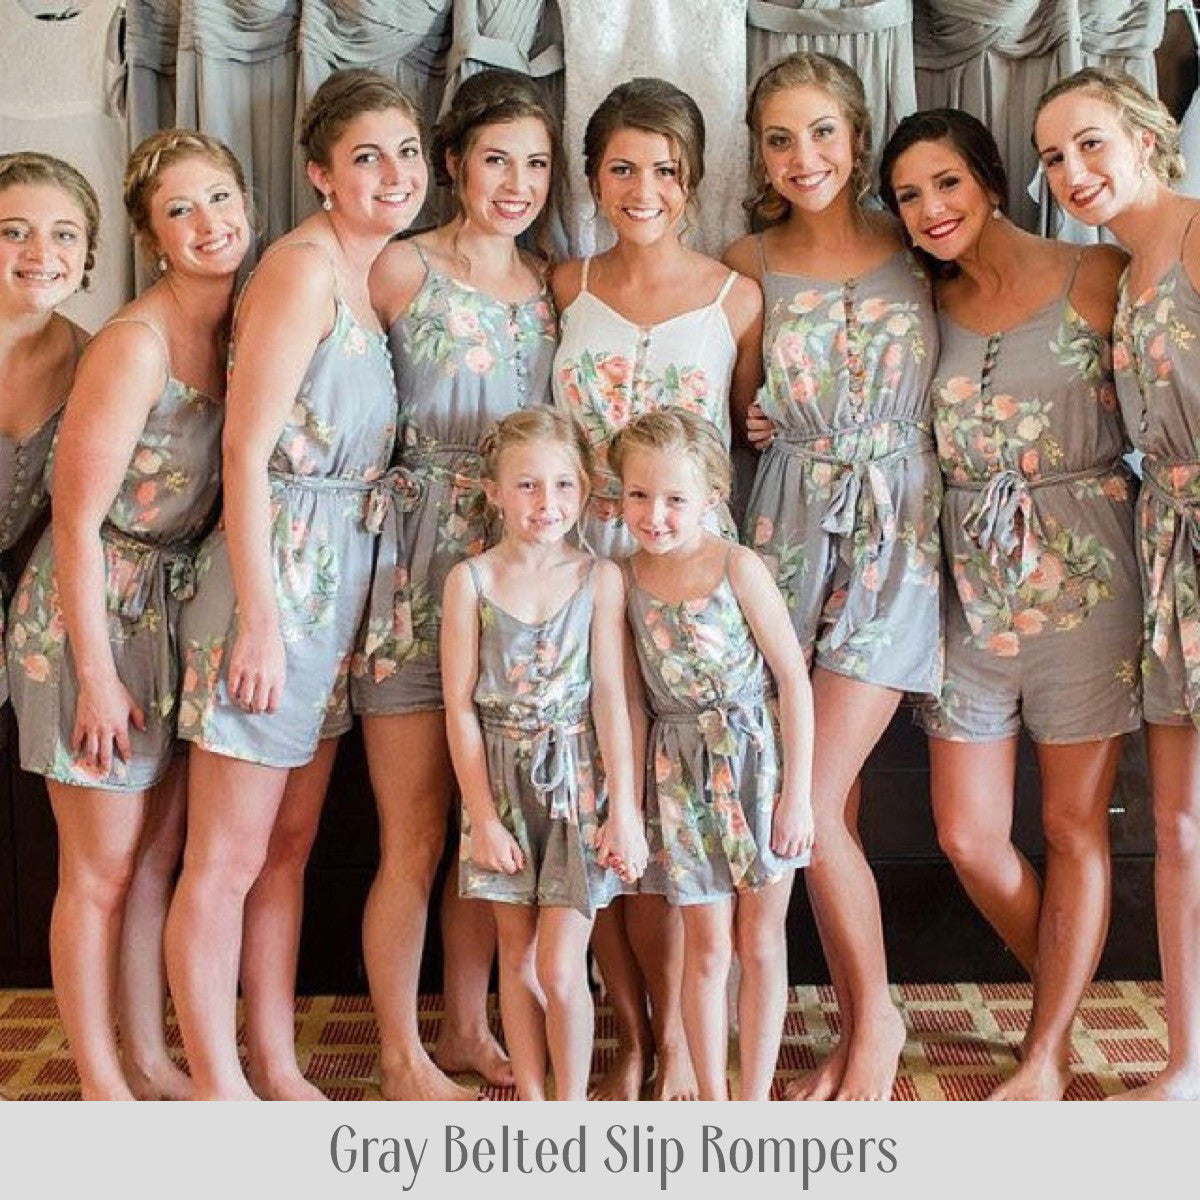 White Mismatched Styles Dreamy Angel Song Bridesmaids Rompers Set